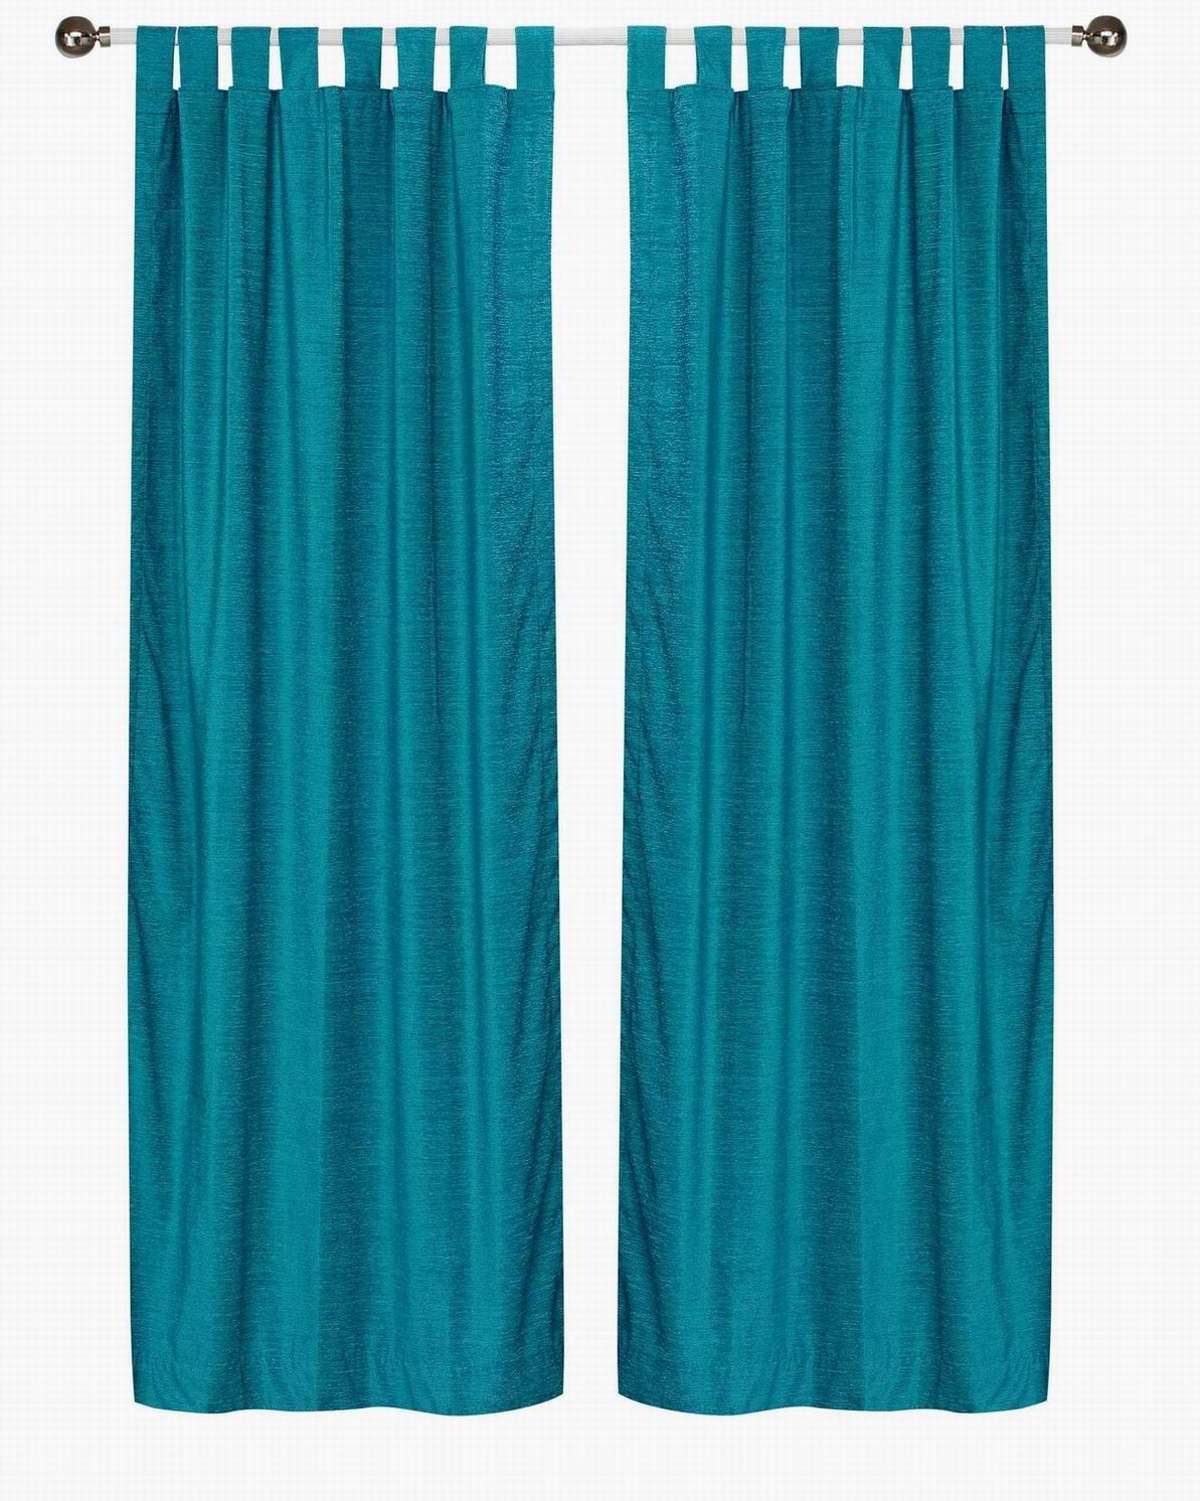 Turquoise: No Lining